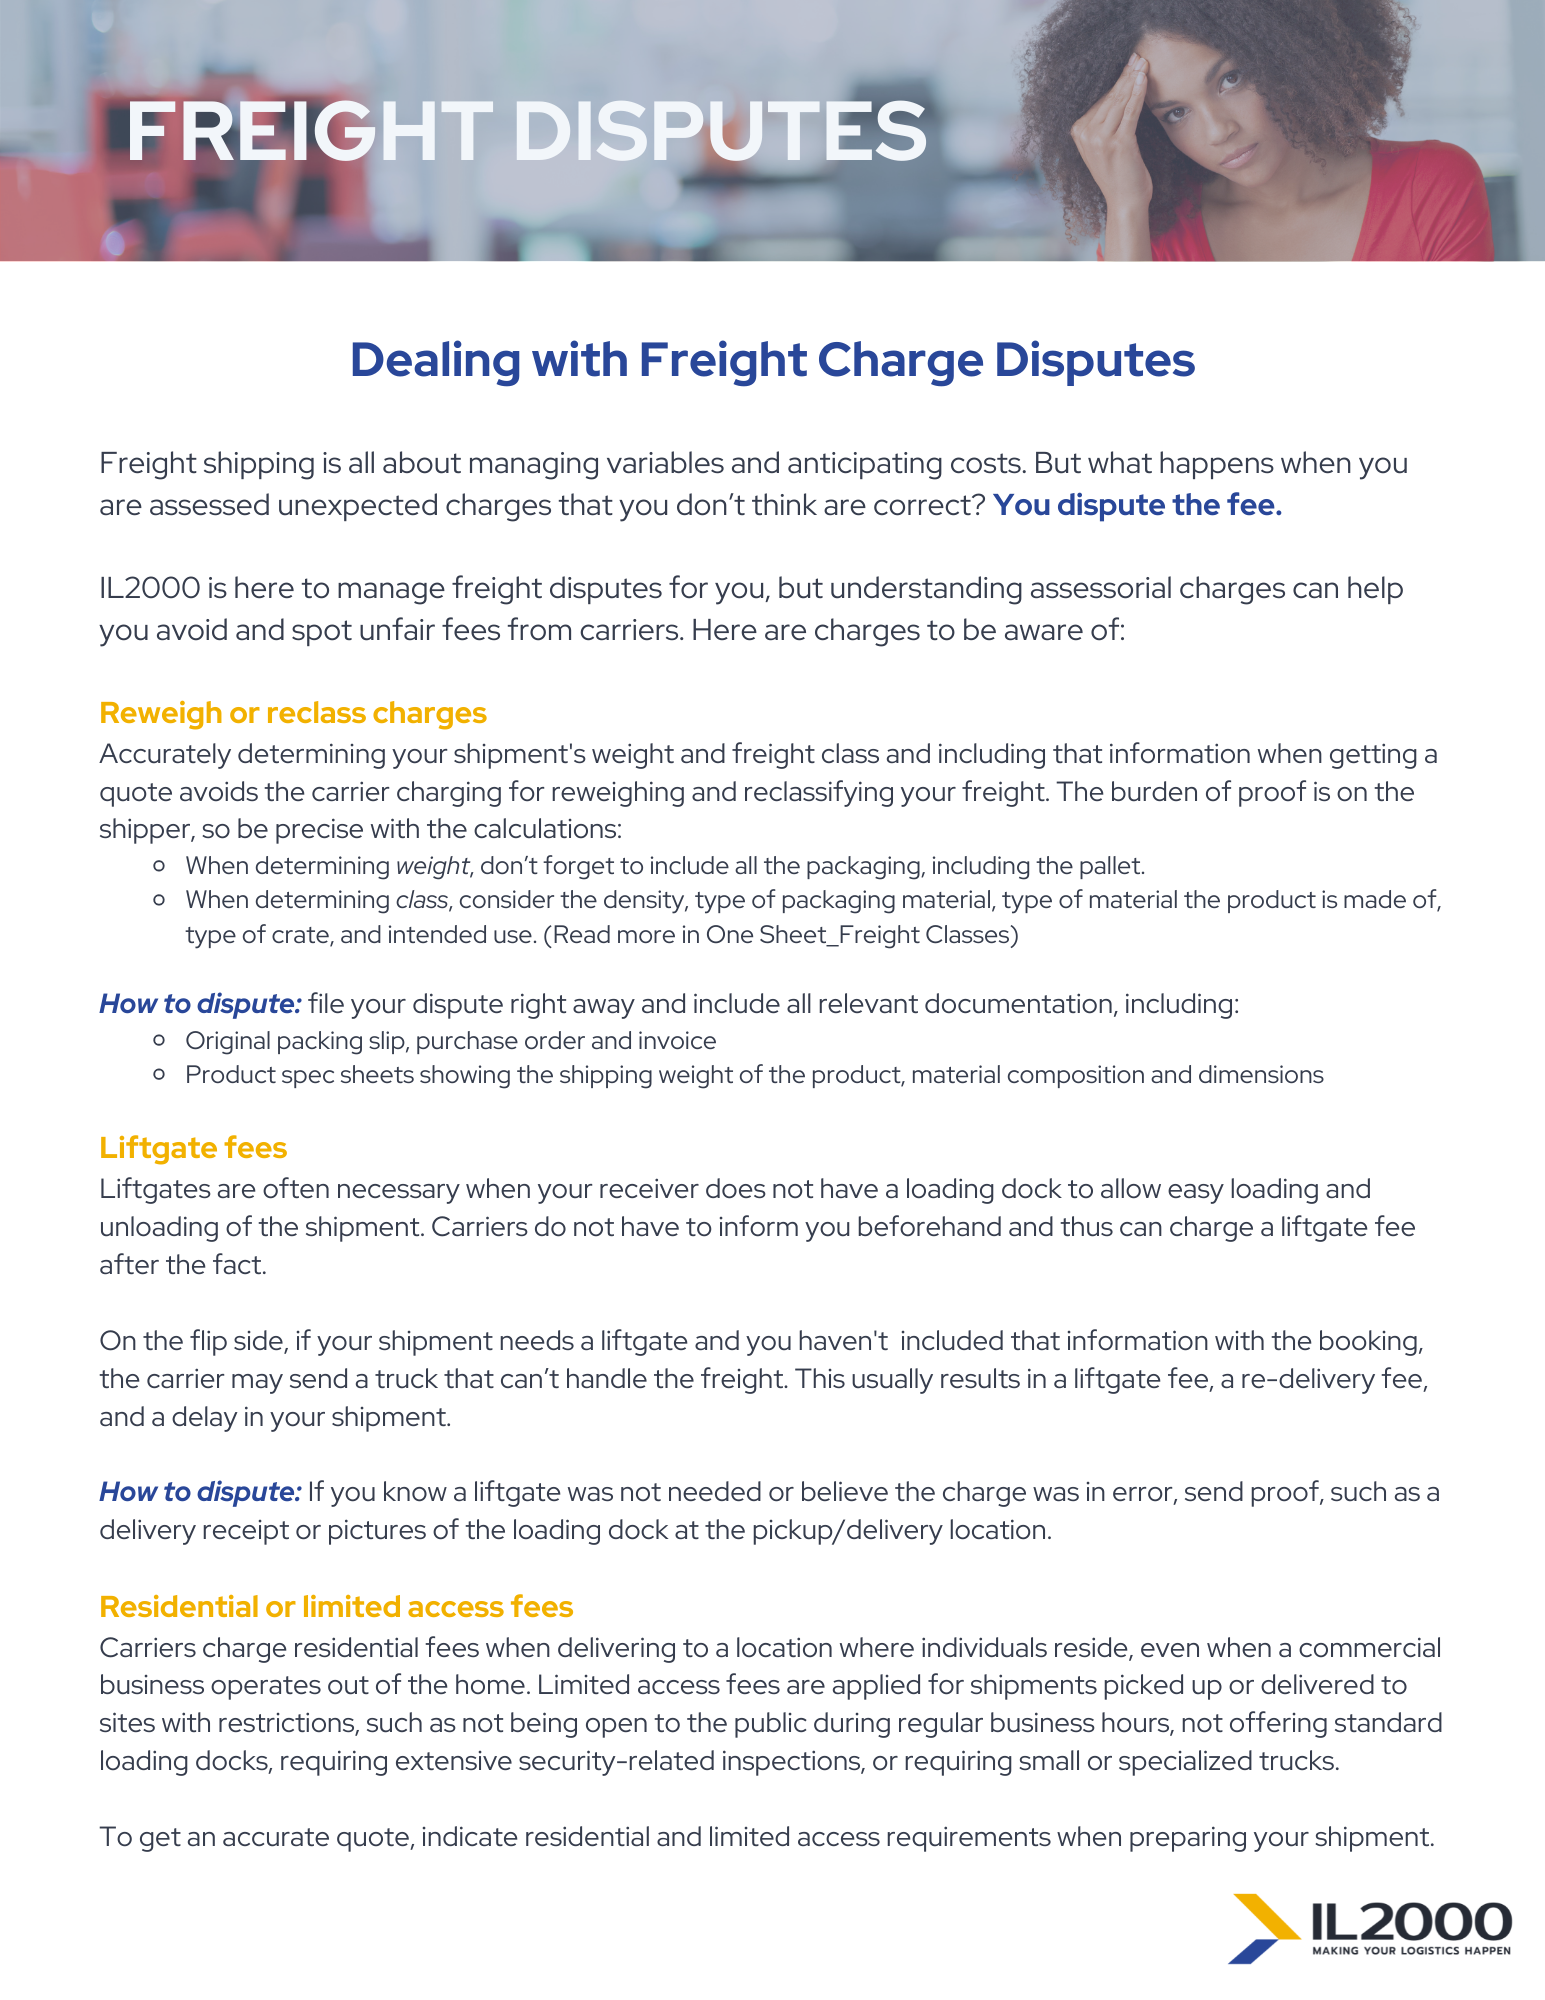 One Sheet_Freight Disputes